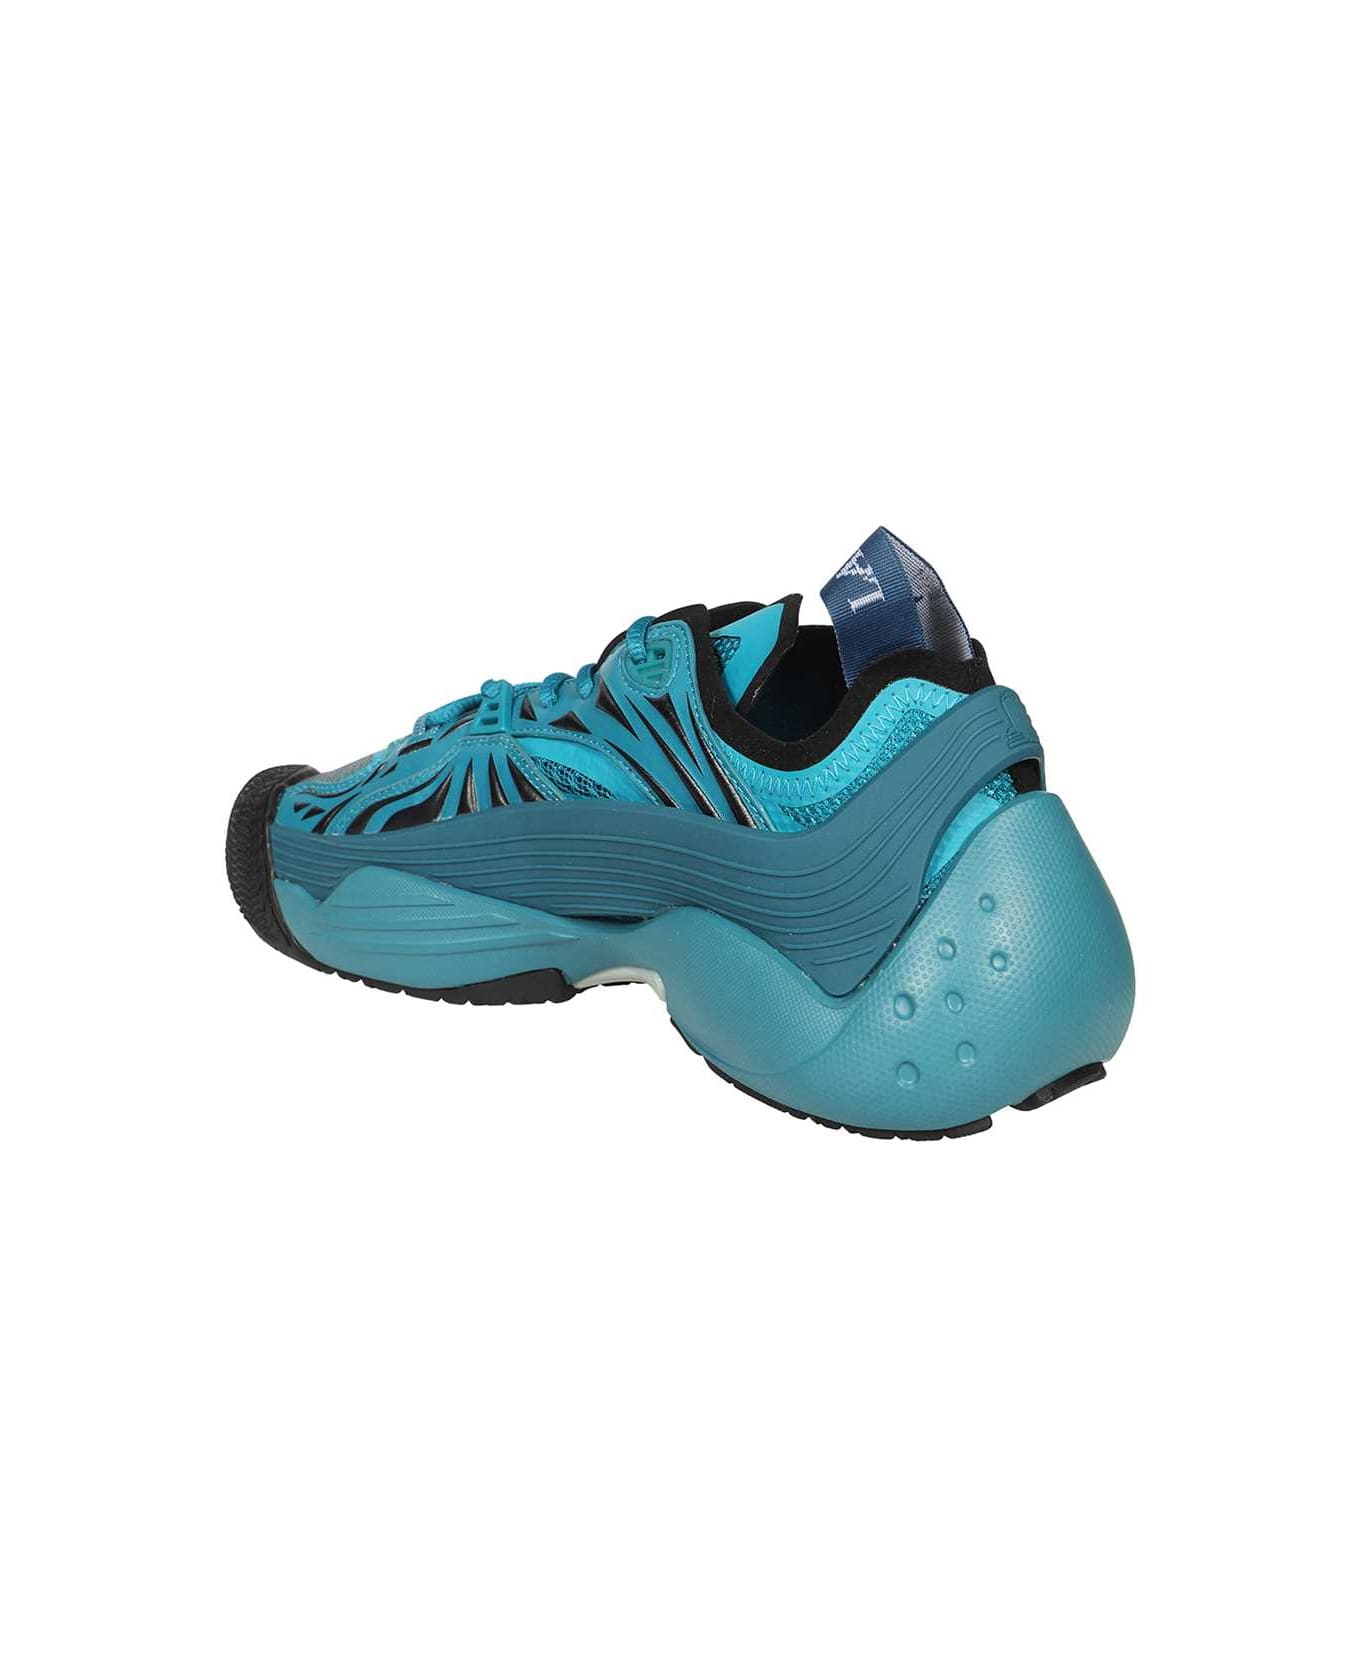 Lanvin Low-top Sneakers - turquoise